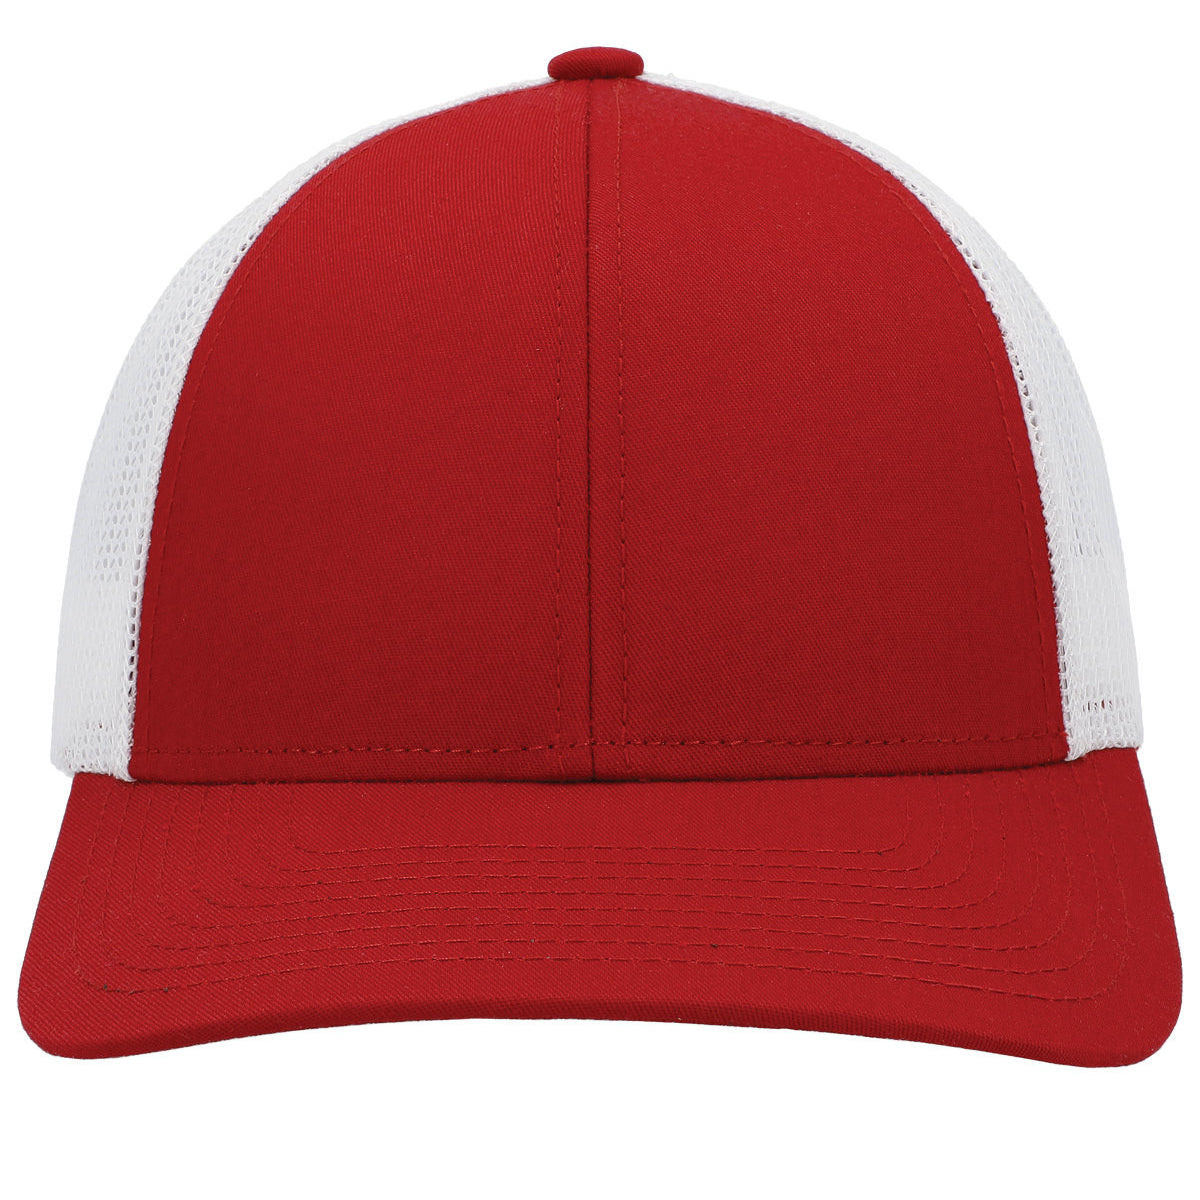 P114-PacificHeadwear-52-RED_WHITE_RED-OS